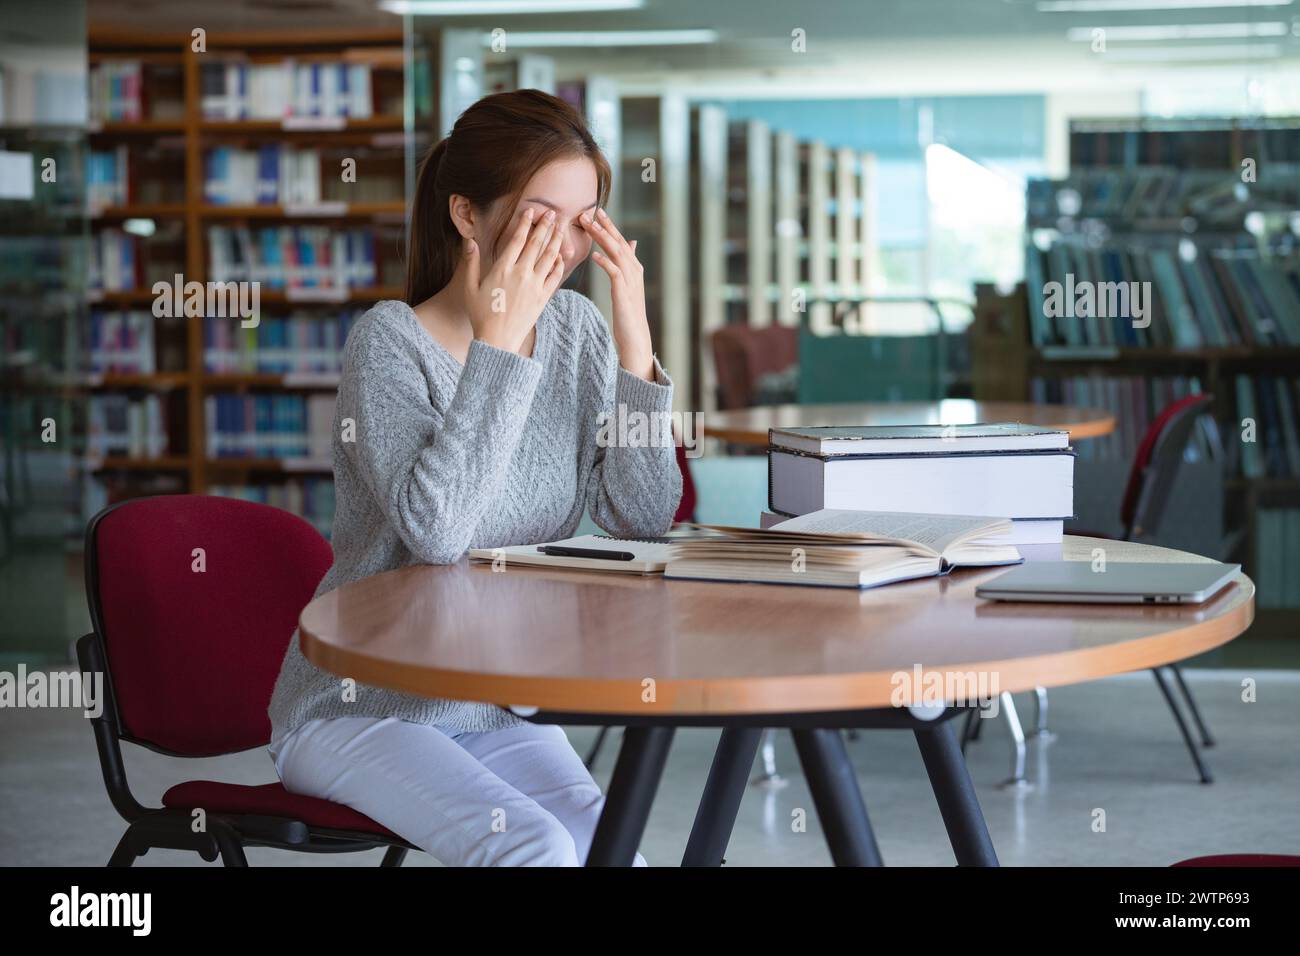 Young Asian woman student rubbing eyes, feeling tired after reading a book in library. Stock Photo